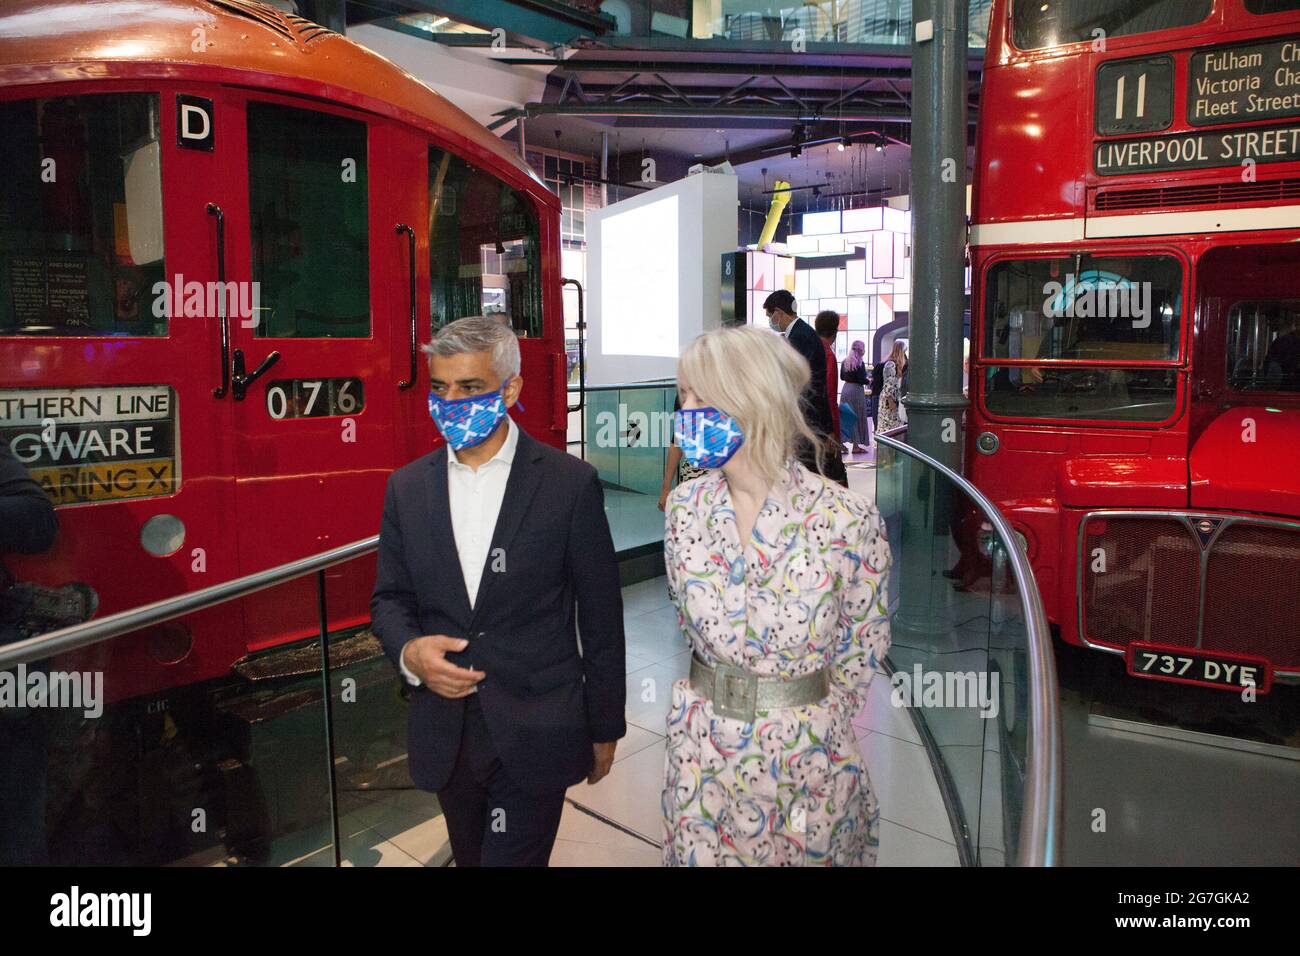 London, UK, 14 July 2021: London Mayor Sadiq Khan visited Covent Garden and the London Transport Museum this morning to launch his #LetsDoLondon campaign. The aim is to encourage tourists to visit central London. As he and Transport for London are making masks compulsory on London Underground it is hoped that tourists can visit safely despite rising coronavirus numbers. At the museum he got to sit in the driver's seat of a bus, which honours his father's job as a bus driver. With him were Justine Simons (Deputy Mayor for Culture and the Creative Industries) and Sam Mullins (Director of the Lon Stock Photo